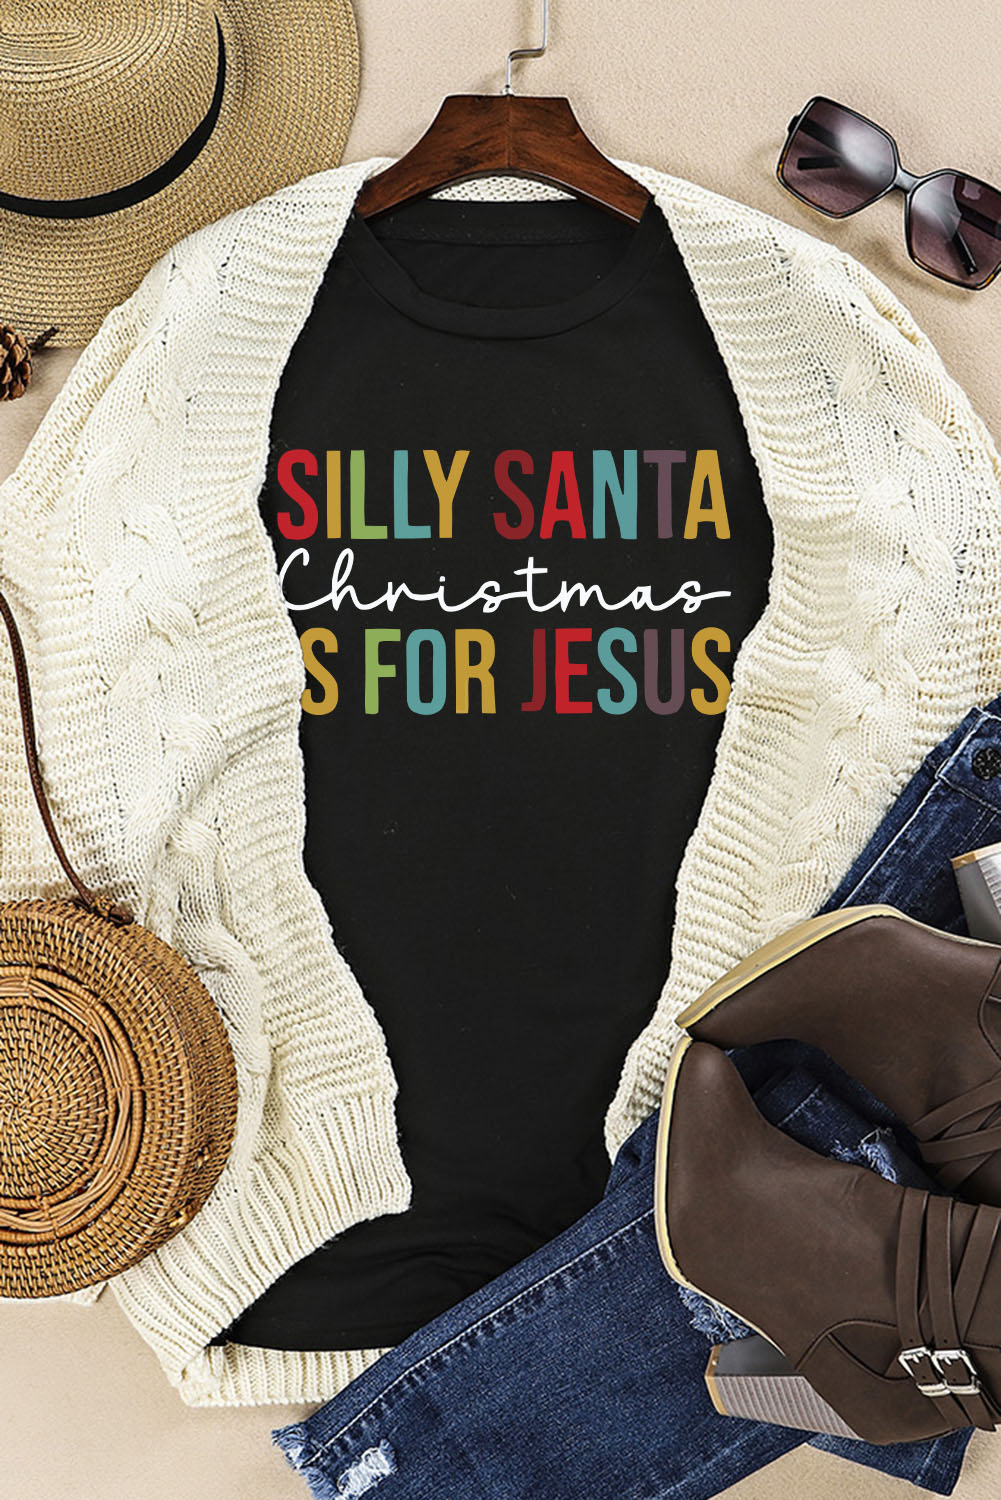 Black Silly Santa Christmas is For Jesus Graphic T Shirt Graphic Tees JT's Designer Fashion